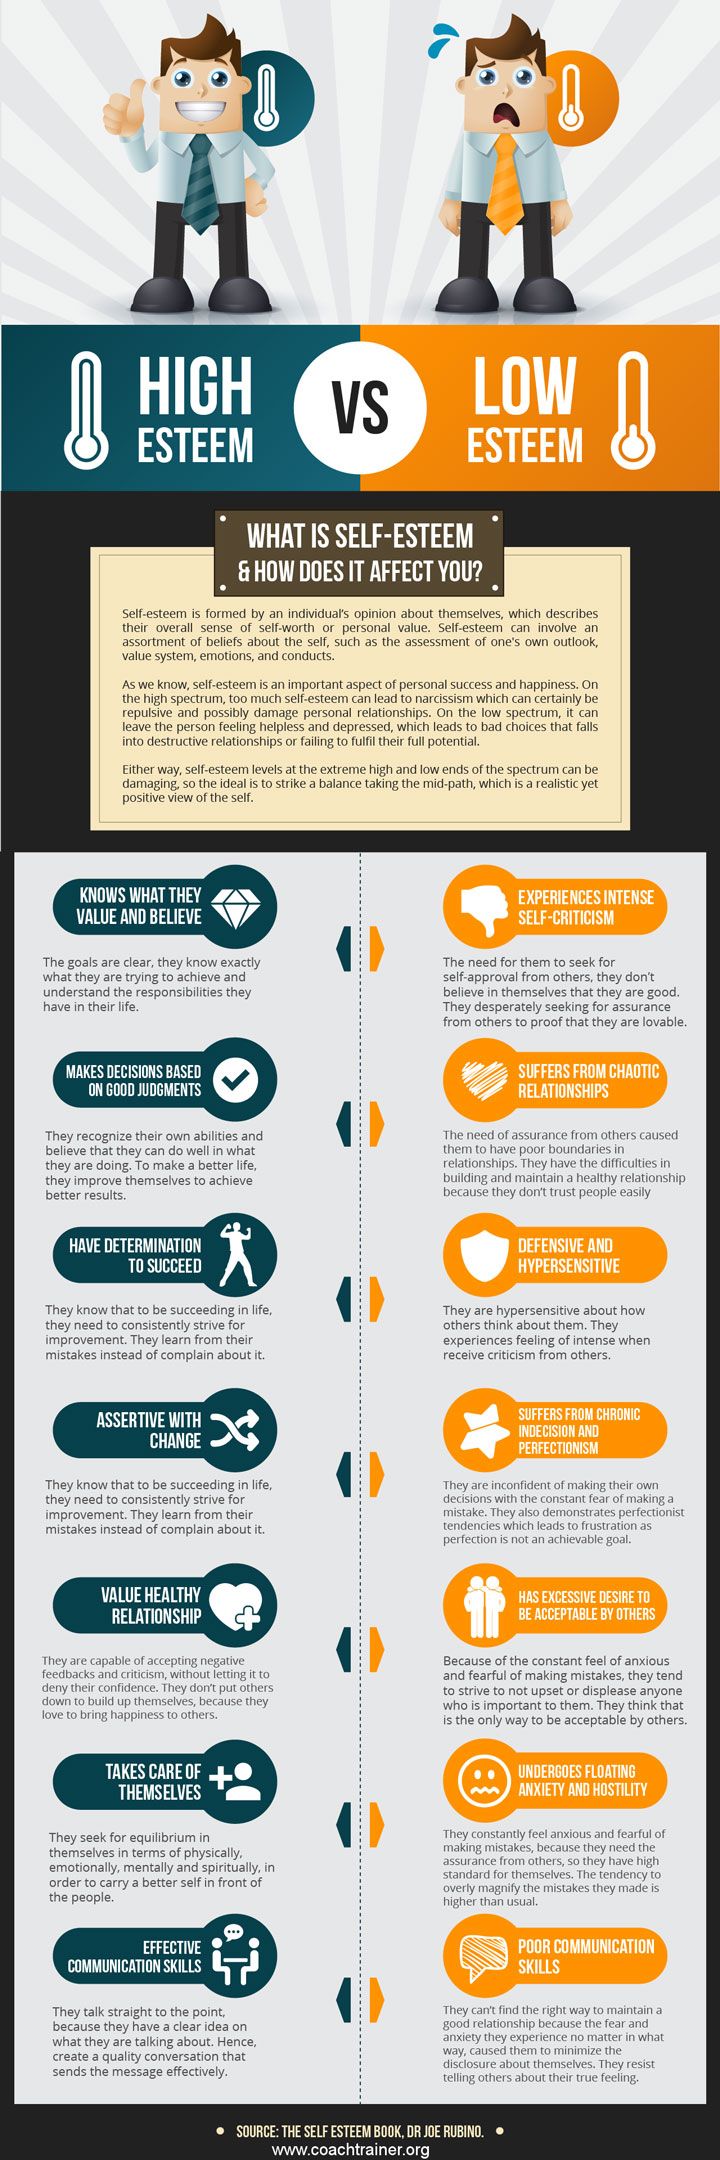 Psychology-Infographic-Low-self-esteem-is-one-of-the-most-common-causes-behind-some-psychological-disor Psychology Infographic : Low self-esteem is one of the most common causes behind some psychological disor...